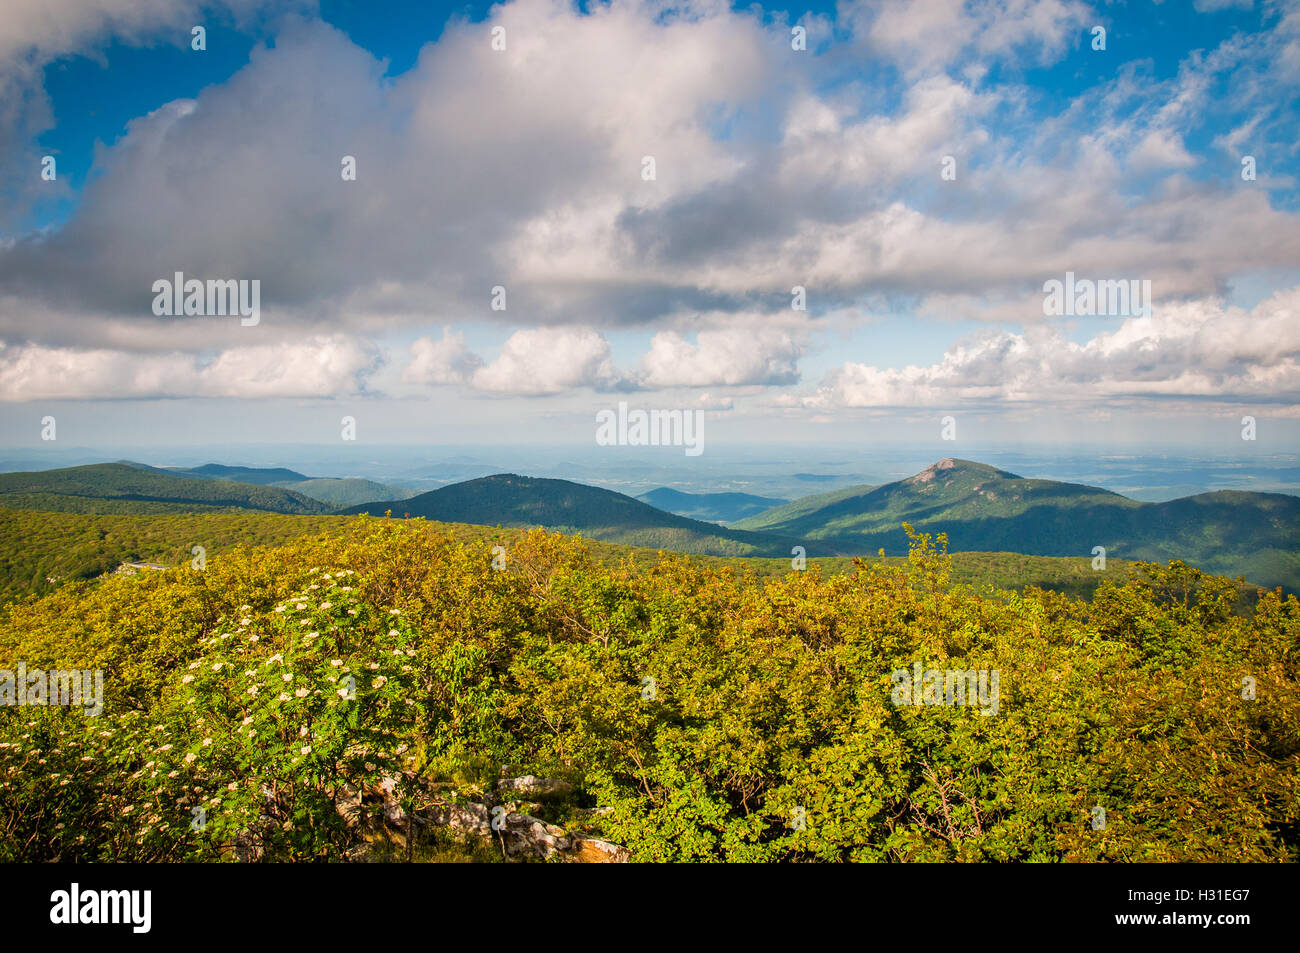 View of the Blue Ridge from Hawksbill Summit, in Shenandoah National Park, Virginia. Stock Photo